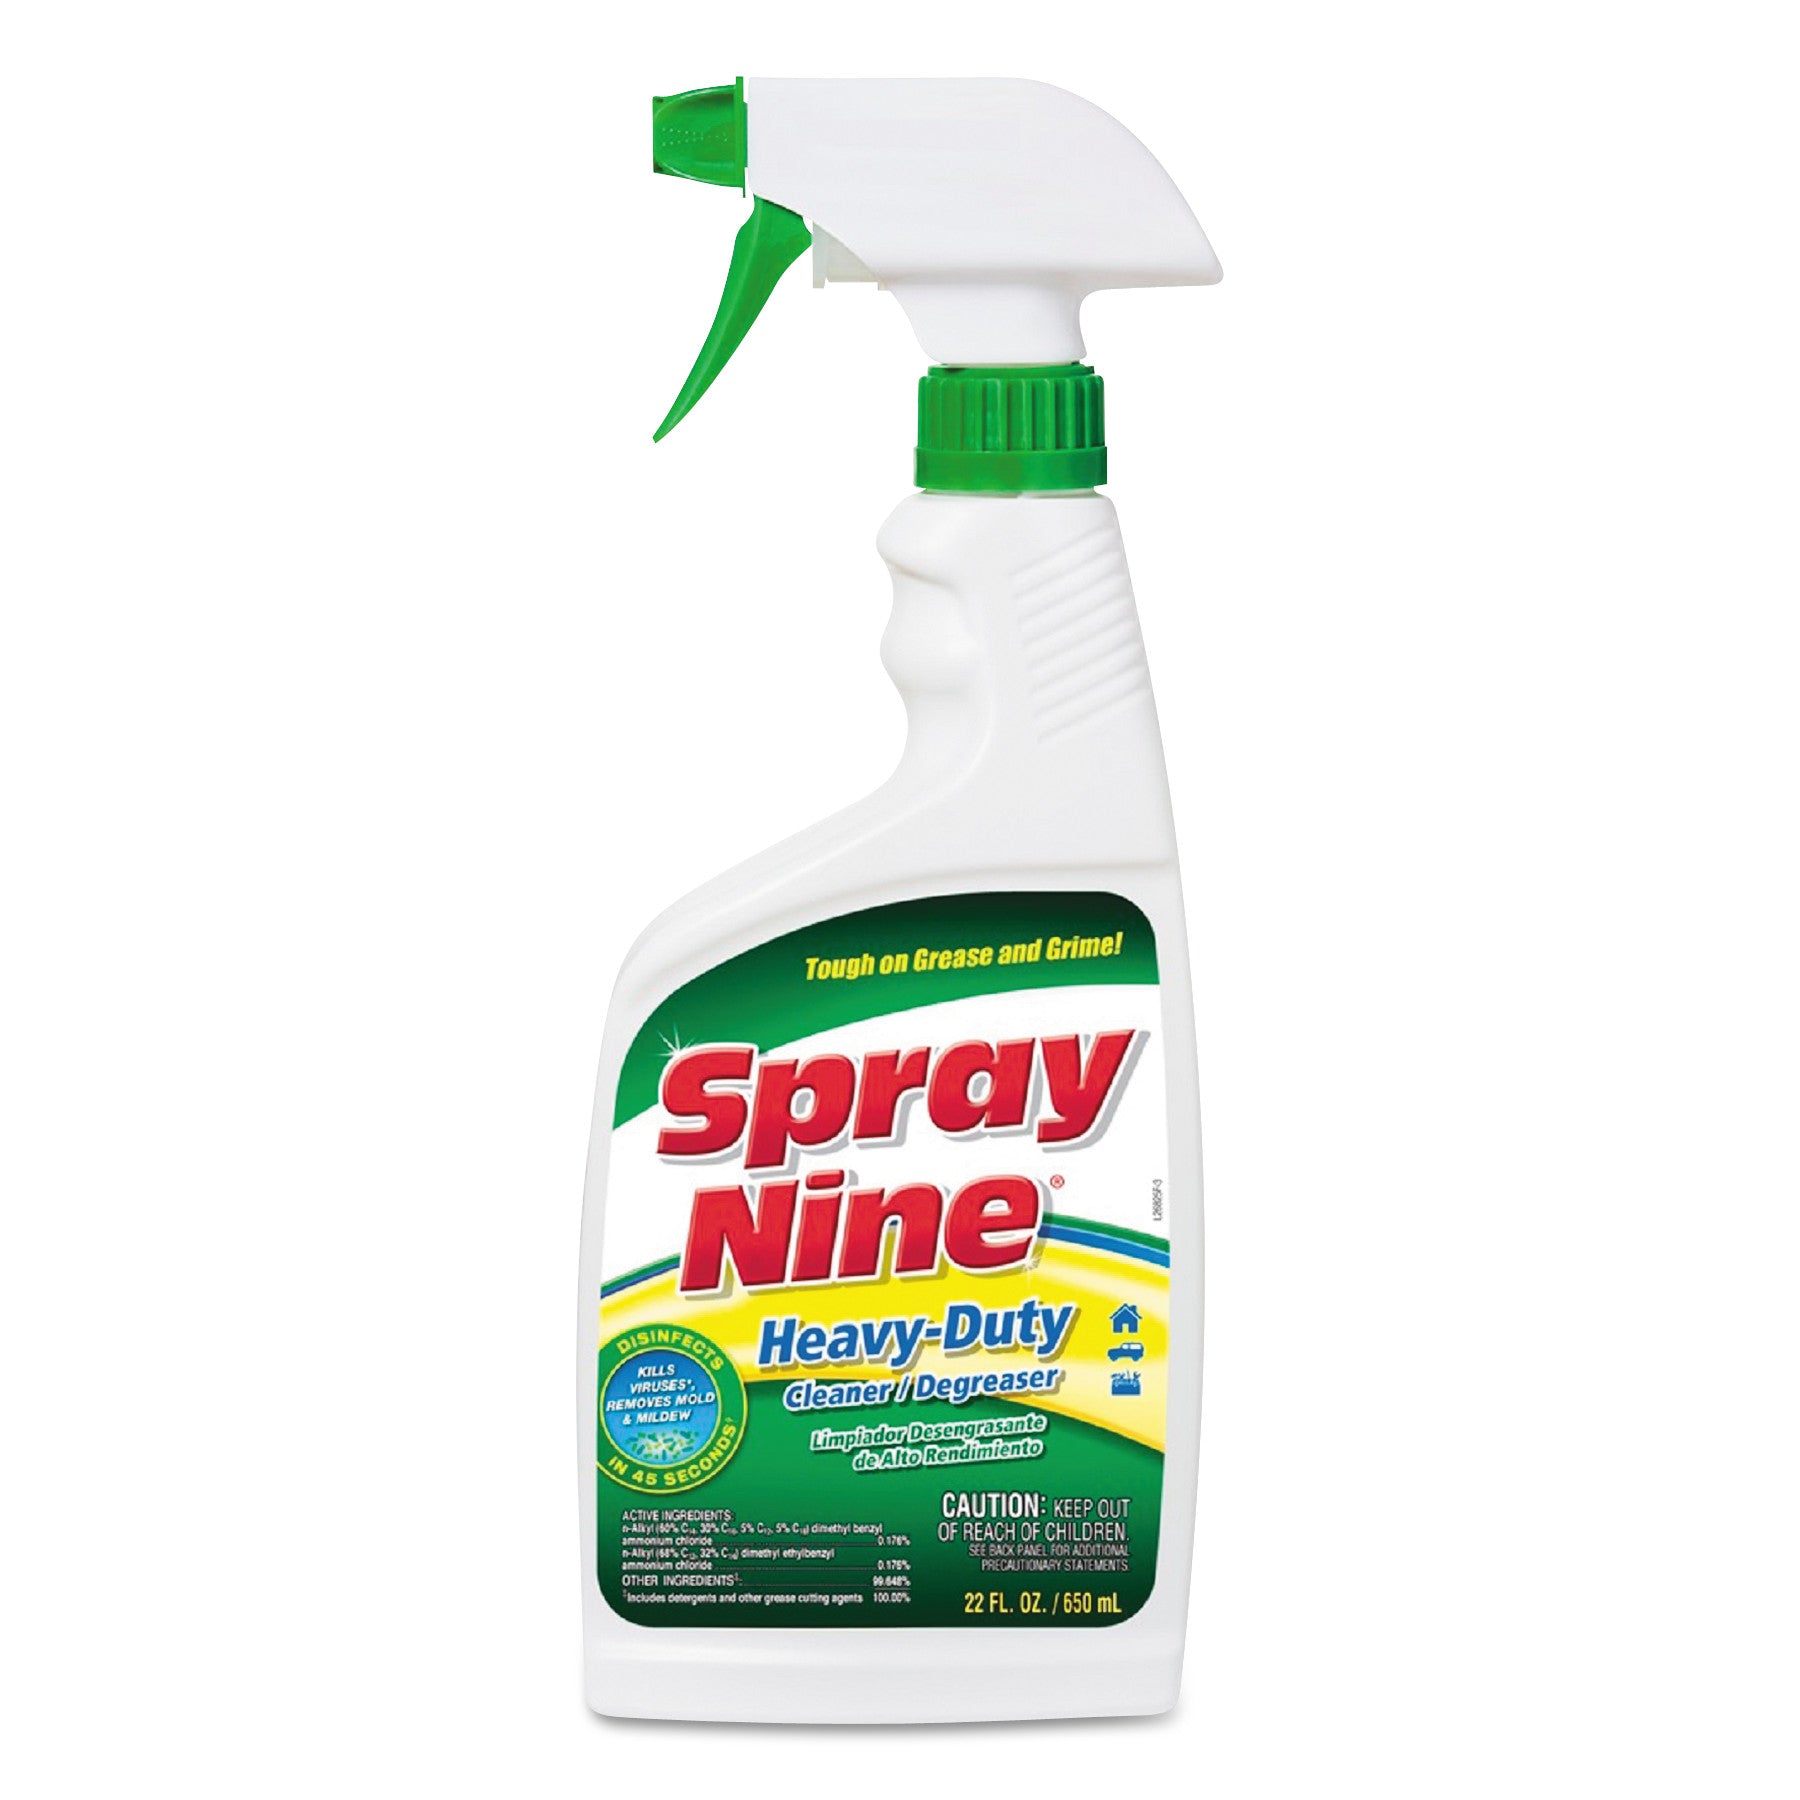 heavy-duty-cleaner-degreaser-disinfectant-citrus-scent-22-oz-trigger-spray-bottle-12-carton_itw26825 - 2